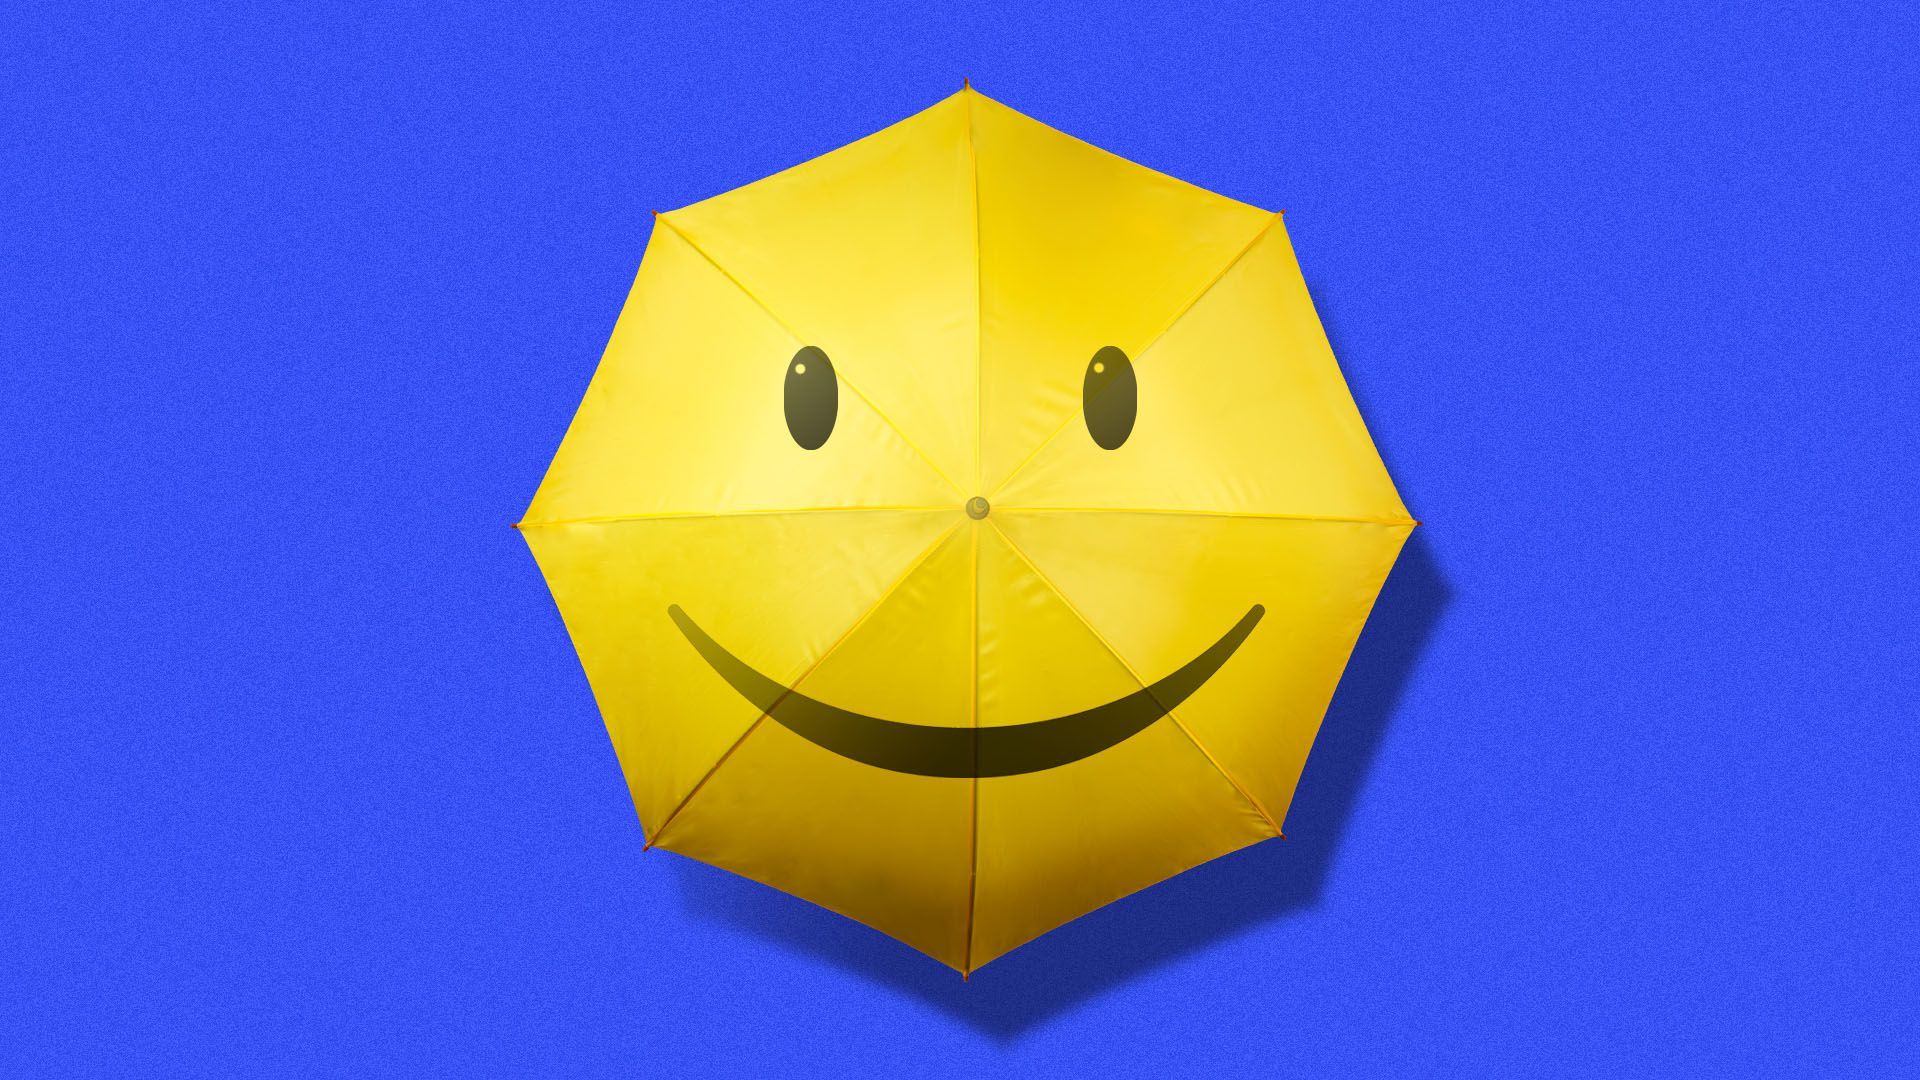 Illustration of a yellow umbrella with smiley face on it